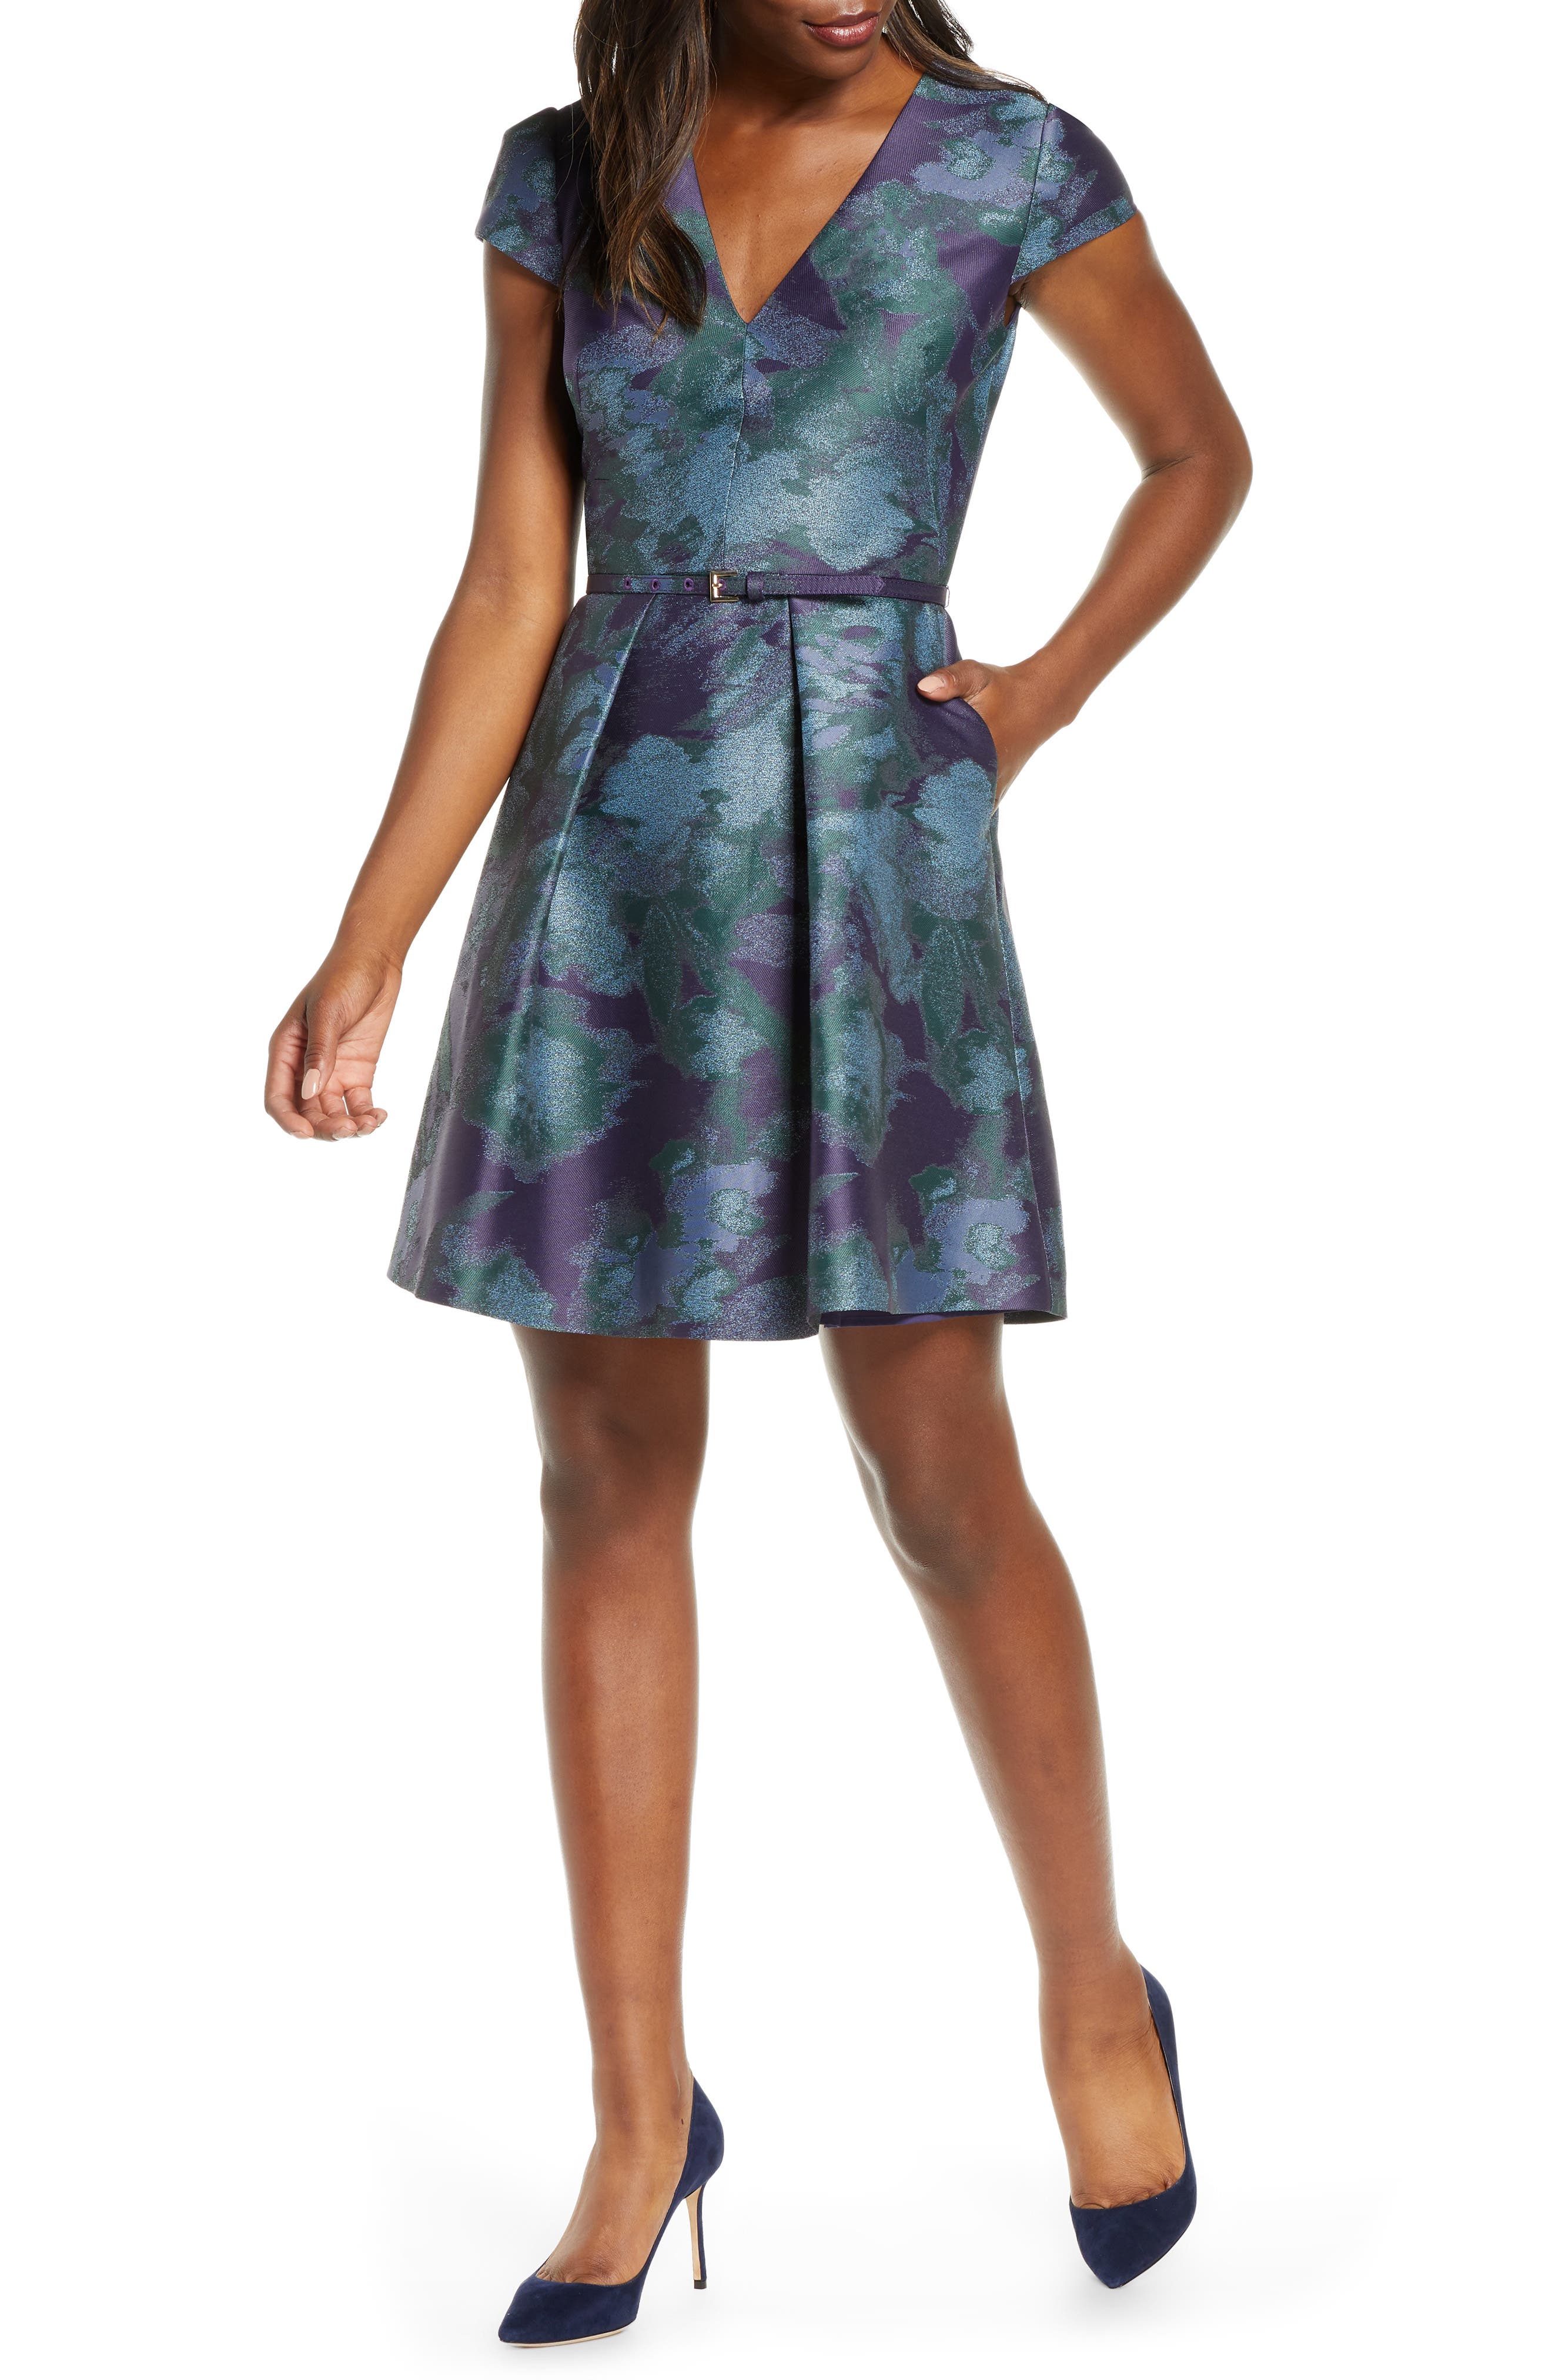 UPC 689886414417 product image for Women's Vince Camuto Cap Sleeve Jacquard Fit & Flare Dress, Size 2 - Blue/green | upcitemdb.com